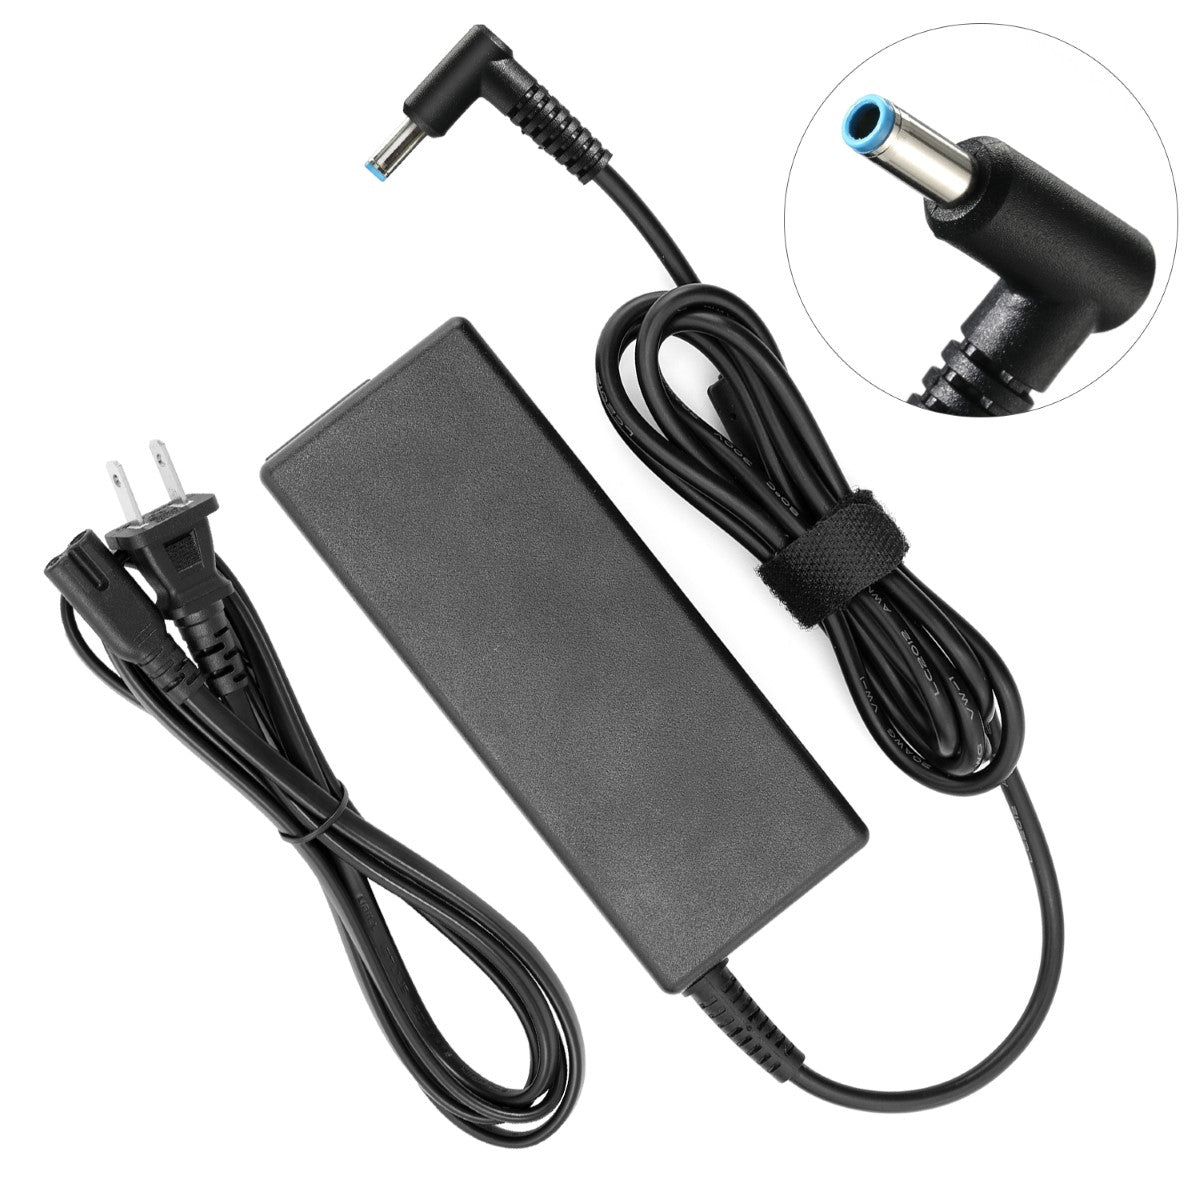 Charger for HP Stream 11 Pro G4 EE Laptop